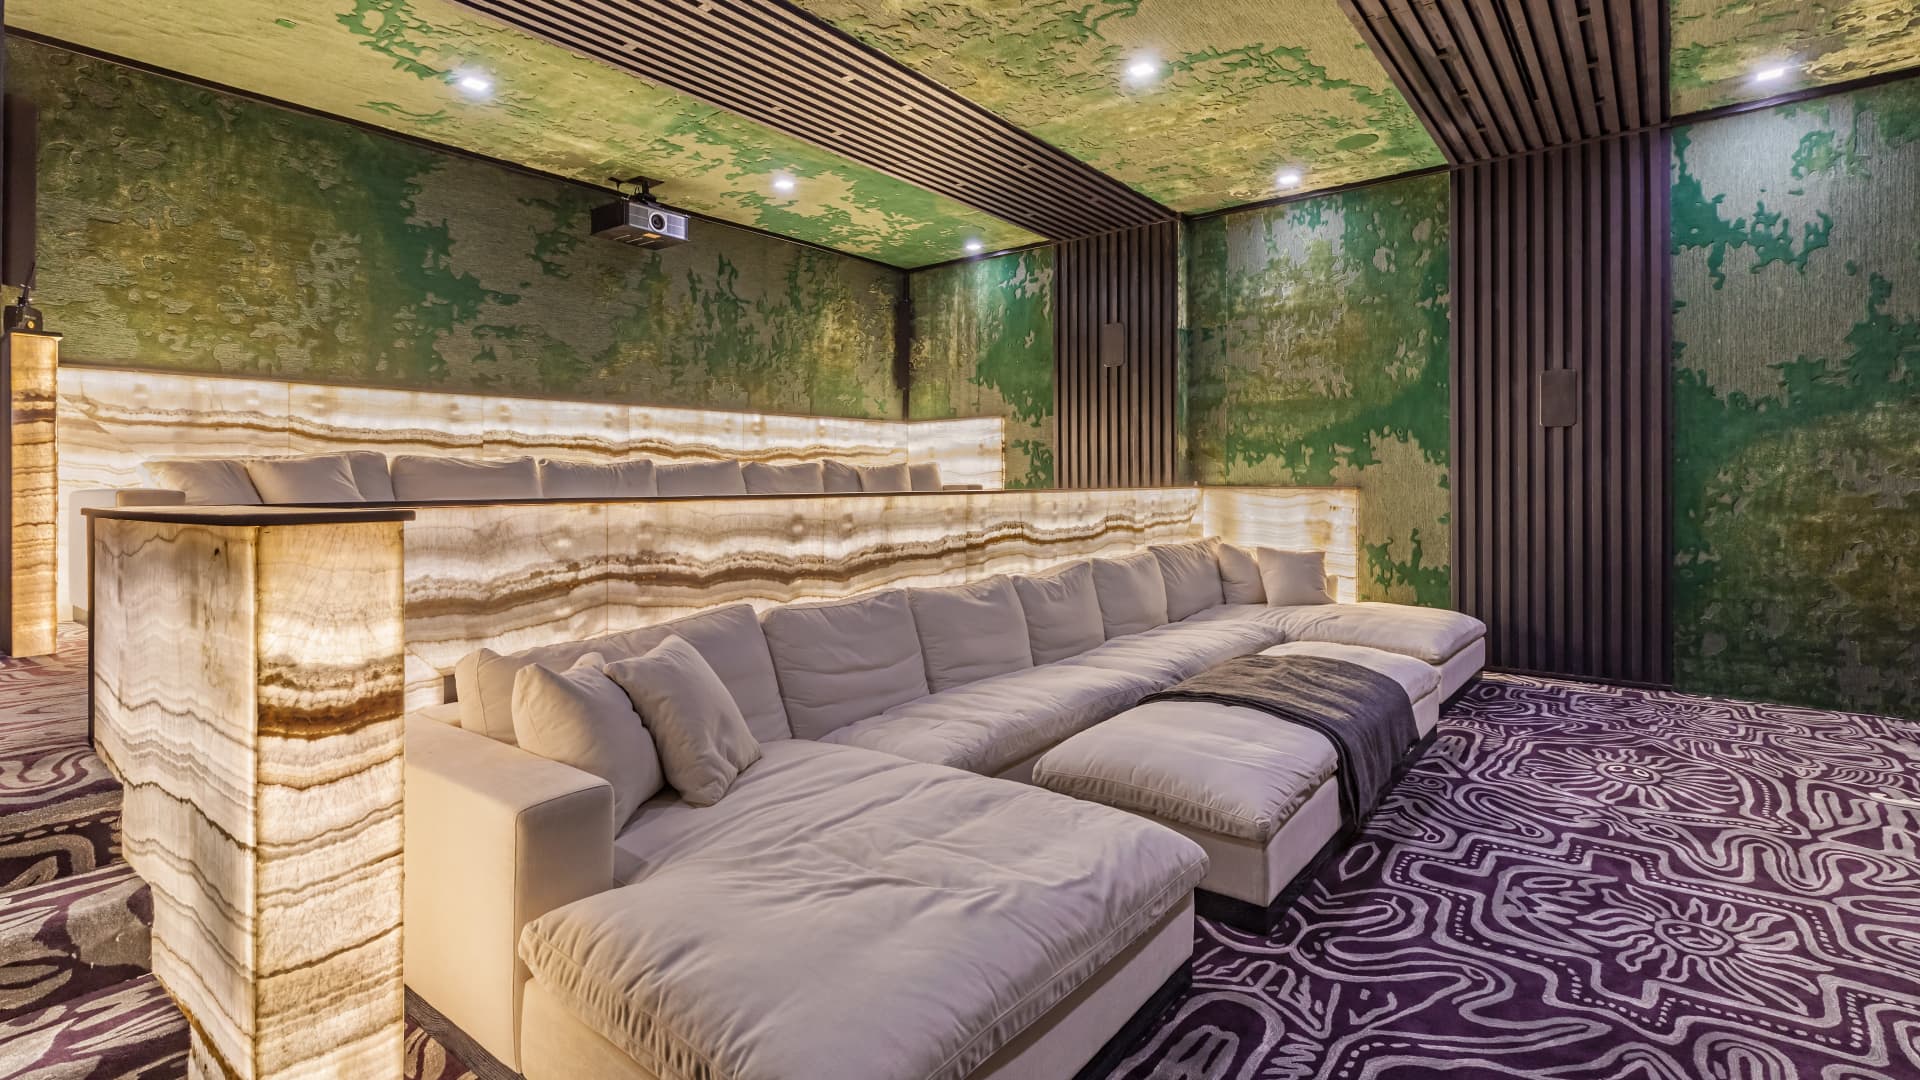 The the home cinema features a state-of-the-art Dolby Atmos sound system, carpeting imported from New Zealand and more illuminated stone.